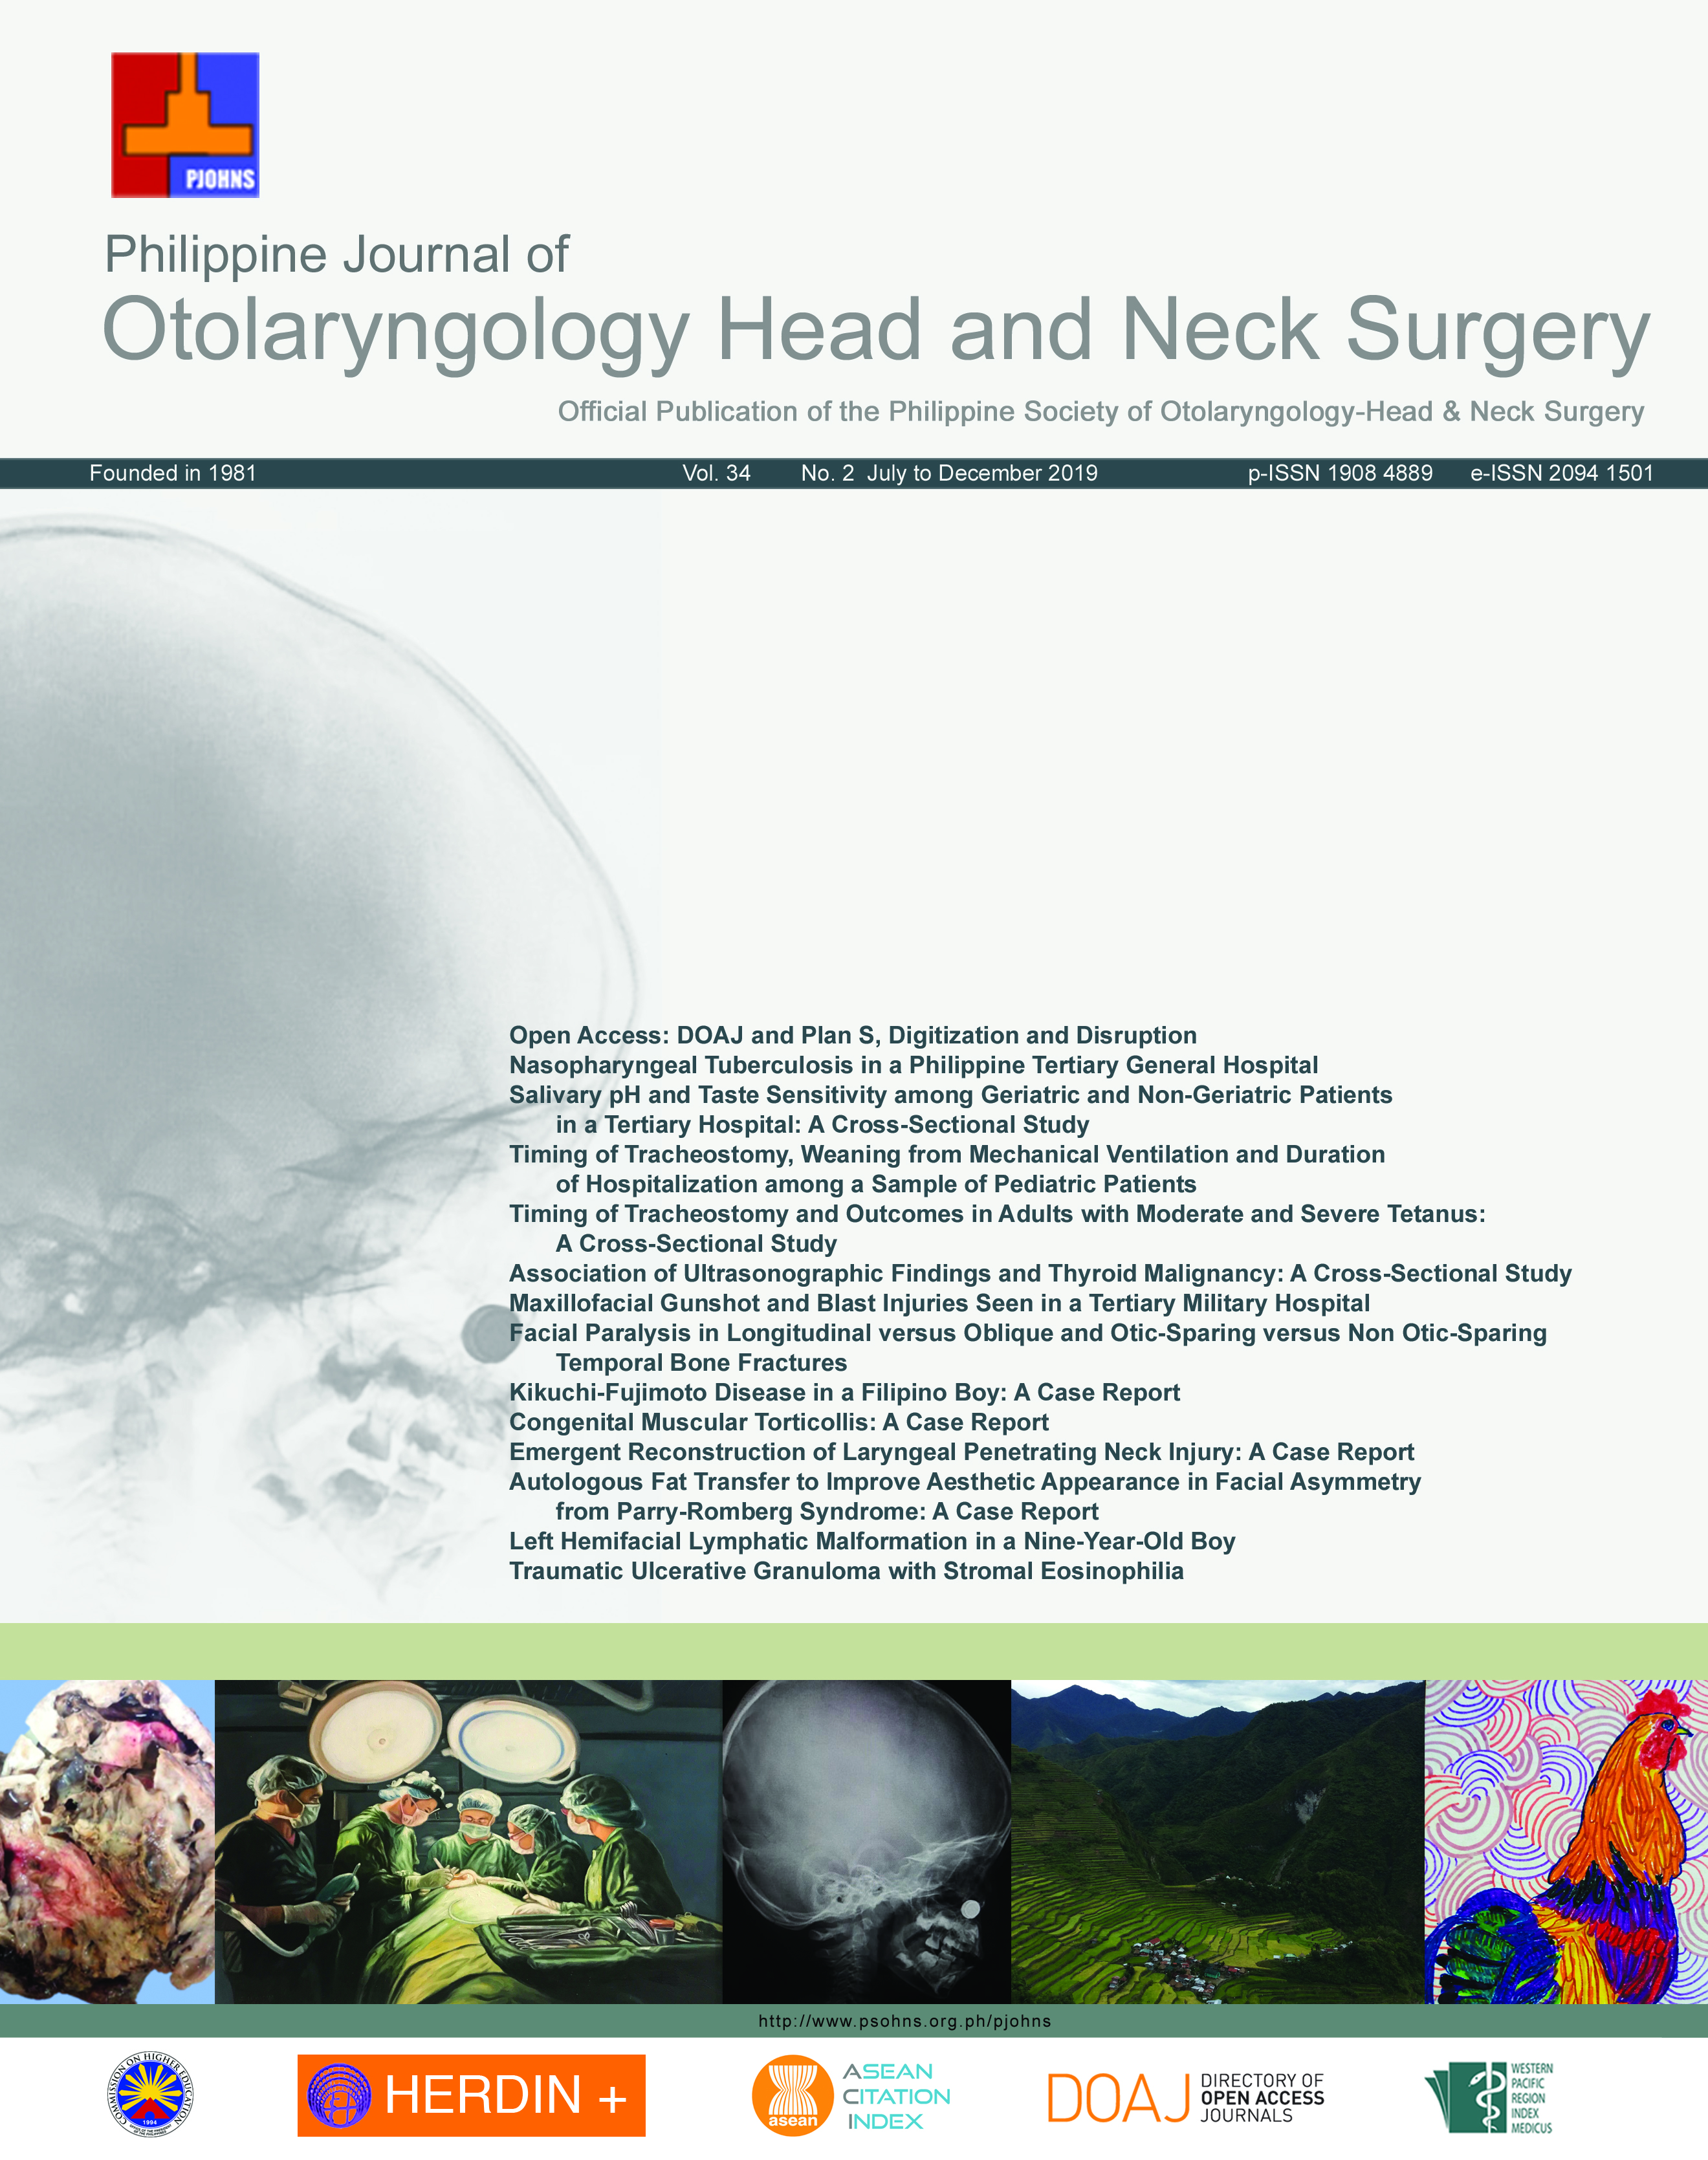 					View Vol. 34 No. 2 (2019): Philippine Journal of Otolaryngology Head and Neck Surgery
				